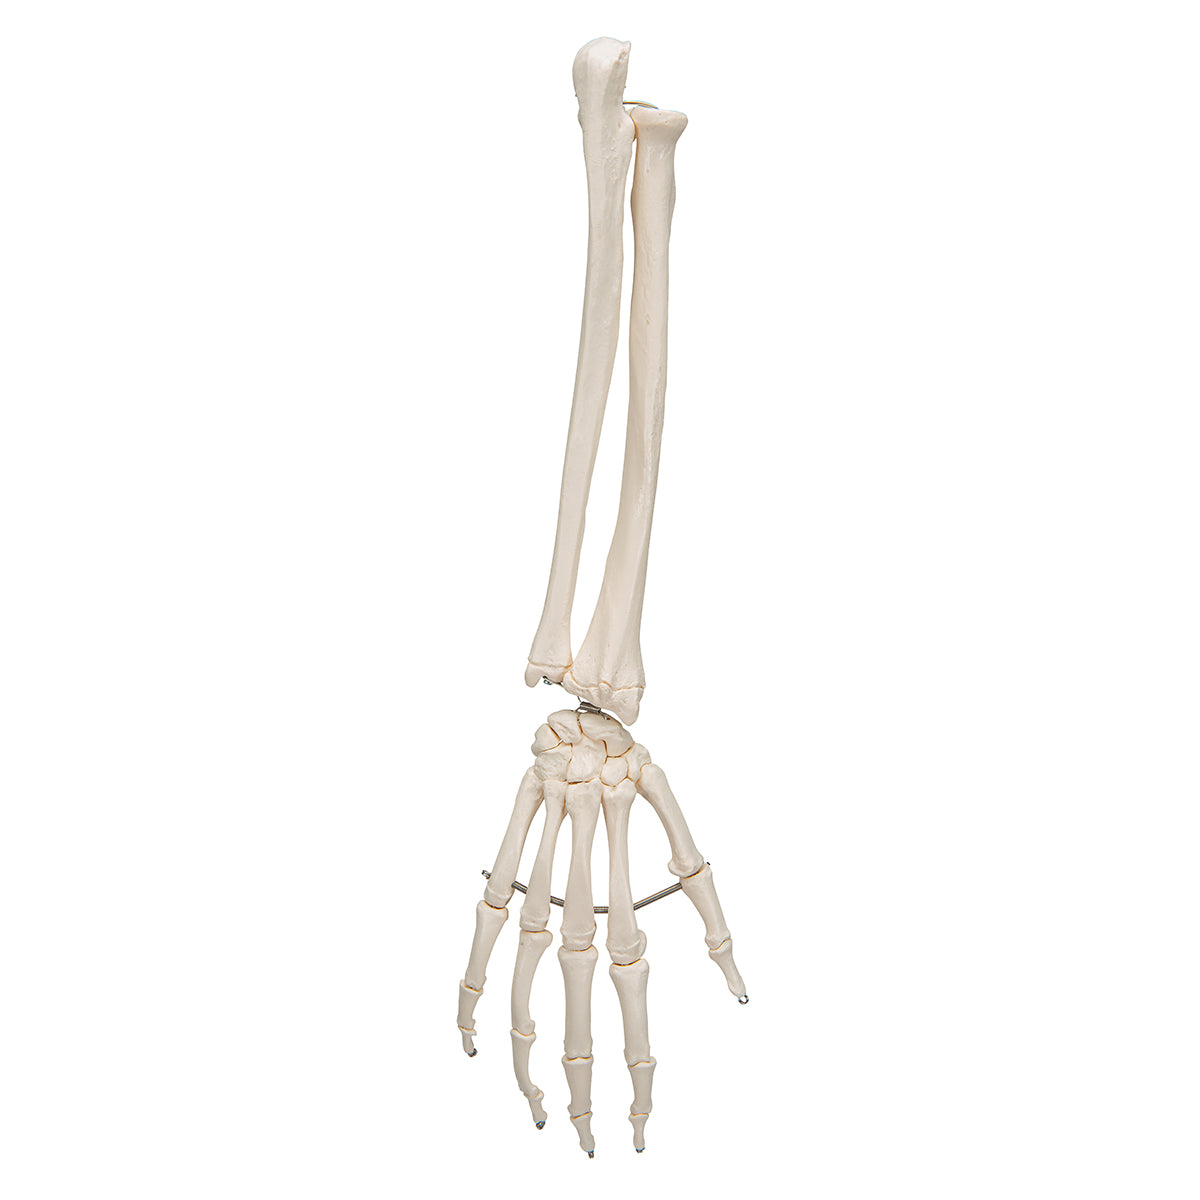 Model of the skeleton of the hand and both forearm bones